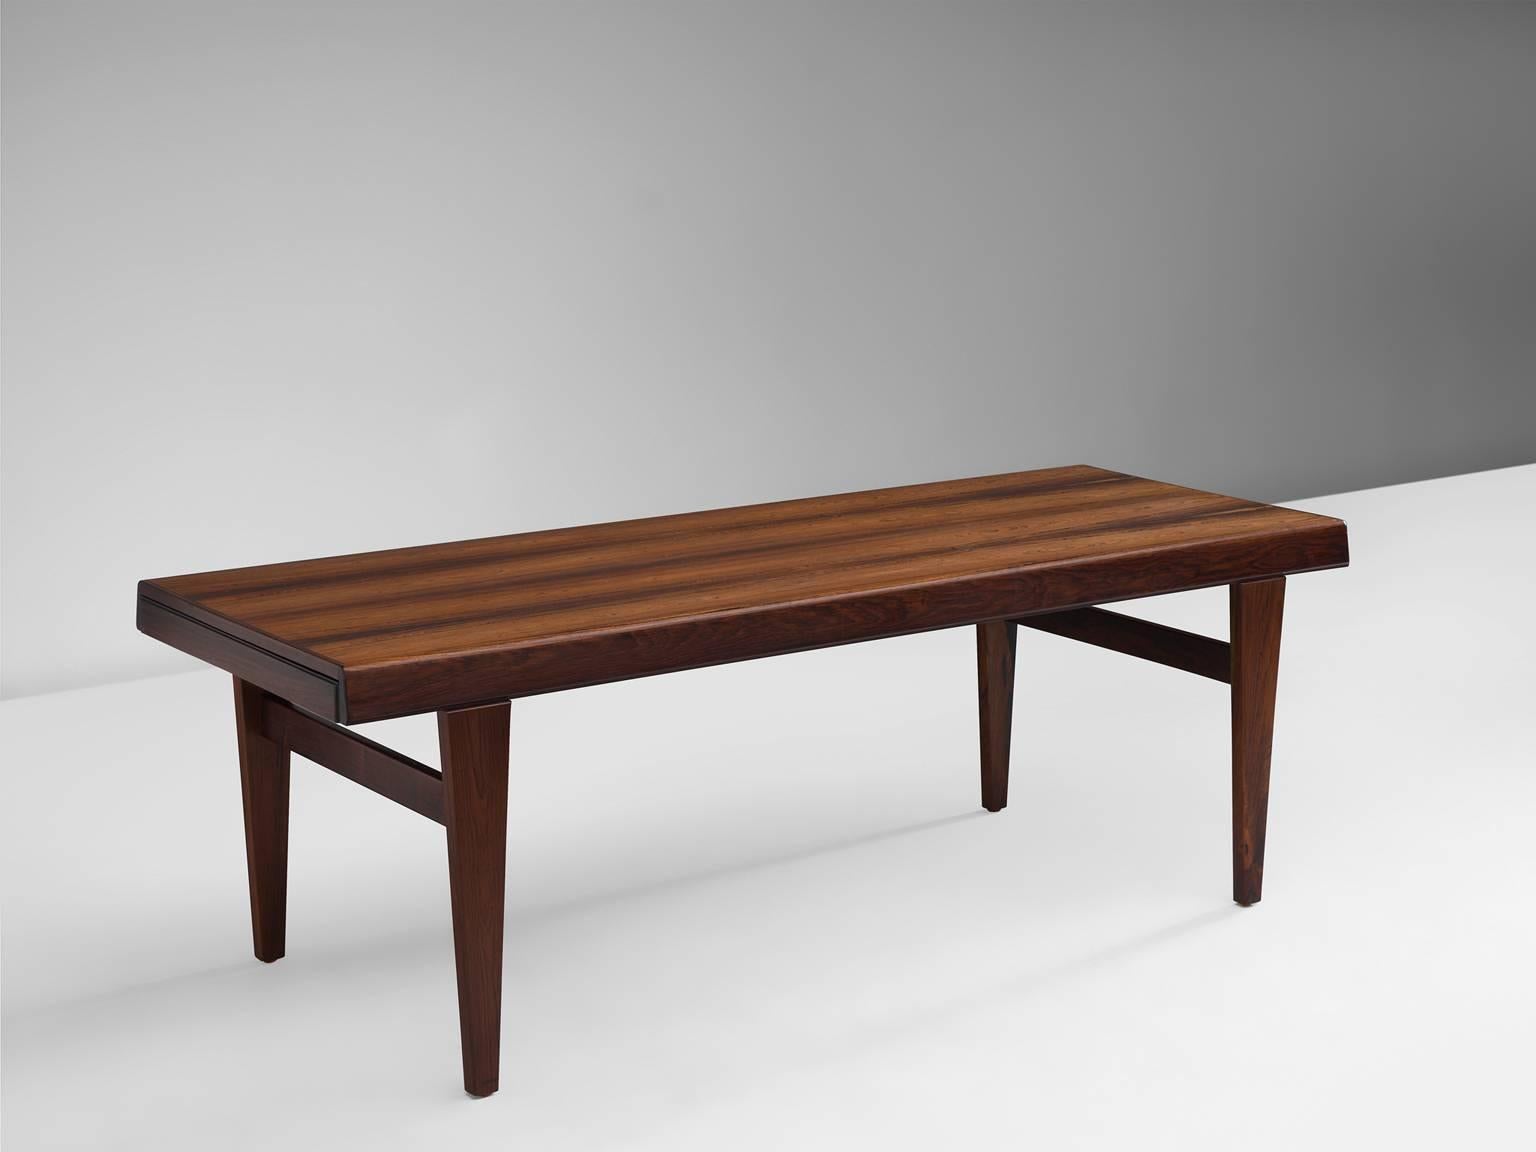 Bench, rosewood, Denmark, 1950s.

This small wooden bench features tapered legs and horizontal slats that connect the legs on both ends. The end of the bench slightly protrudes on either side. The grain of the rosewood give this bench a warm and